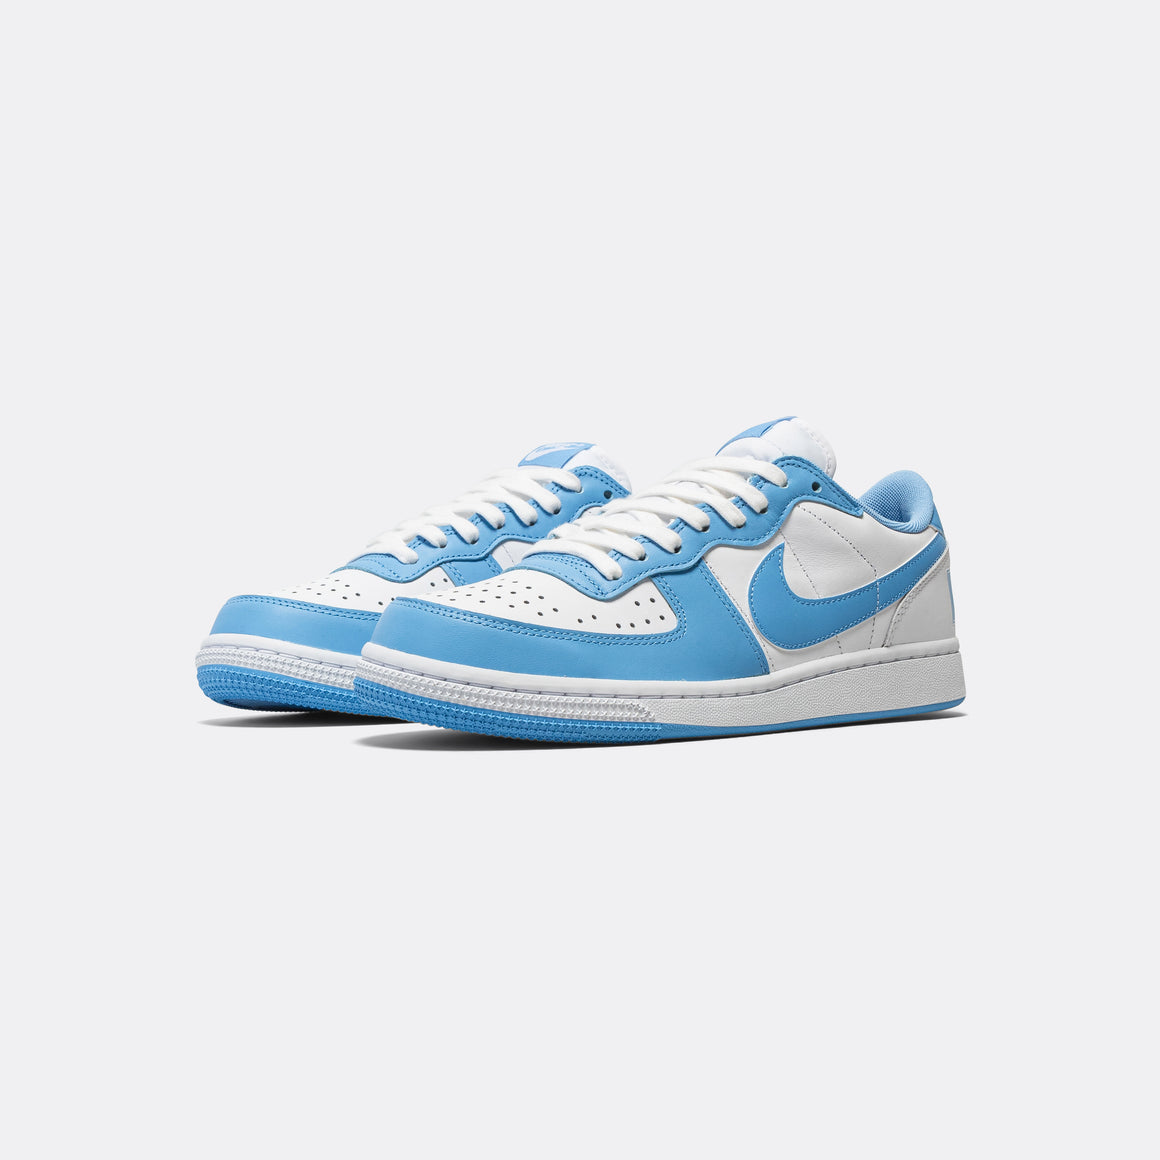 Nike - Terminator  Low - University Blue/White - UP THERE